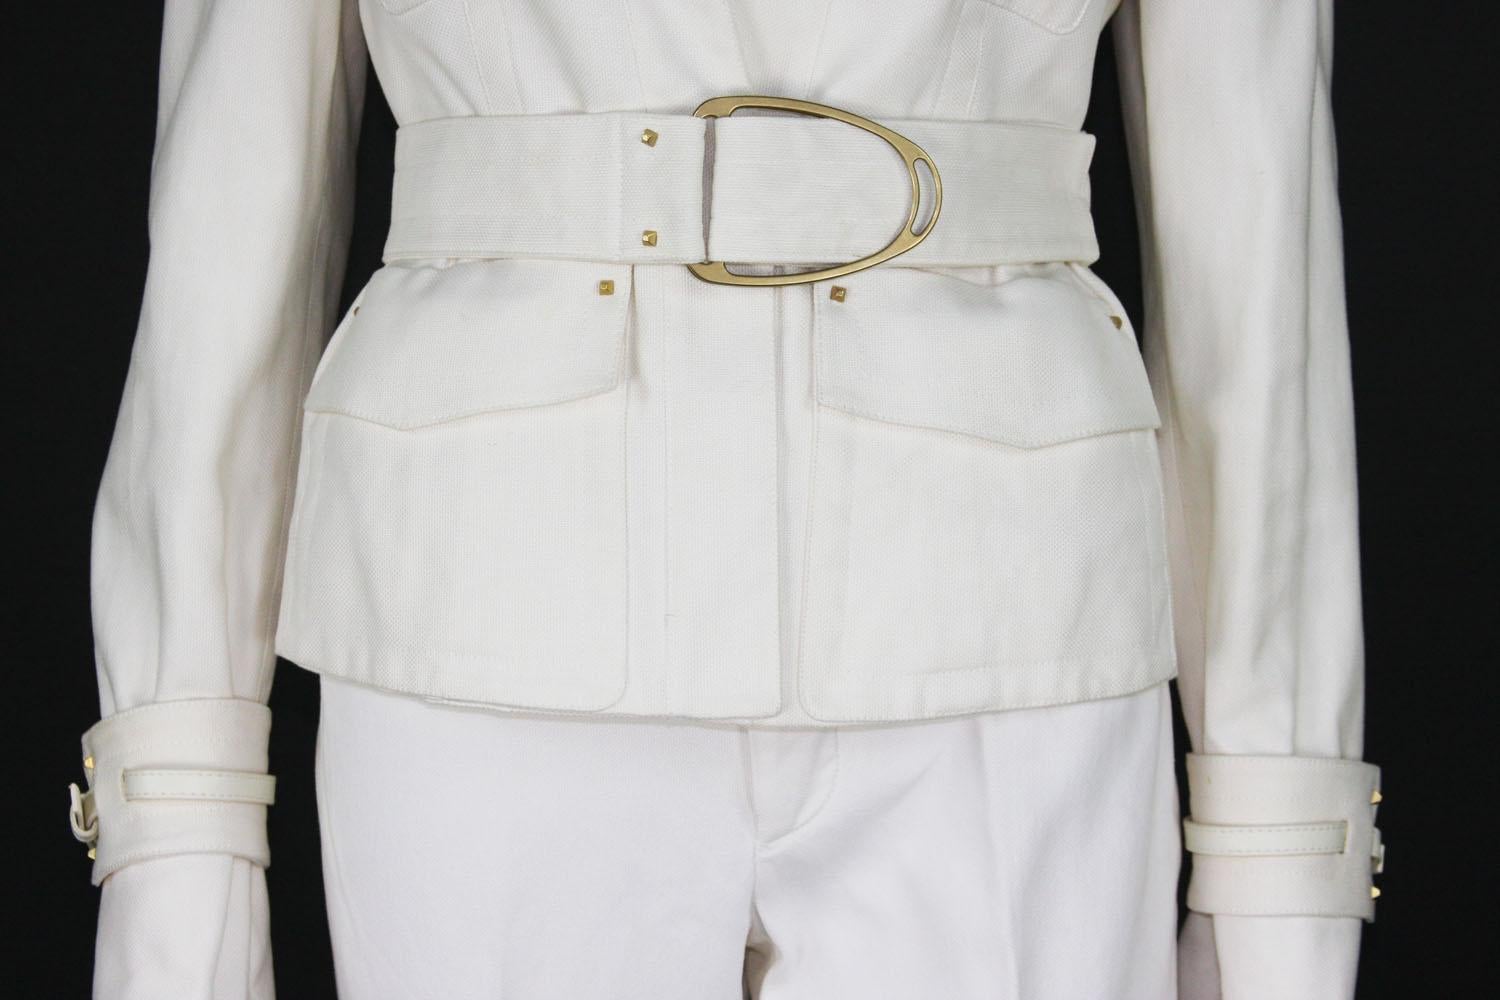 Tom Ford for Gucci 2003 Collection Safari White Cotton Belted Pant Suit 44 1